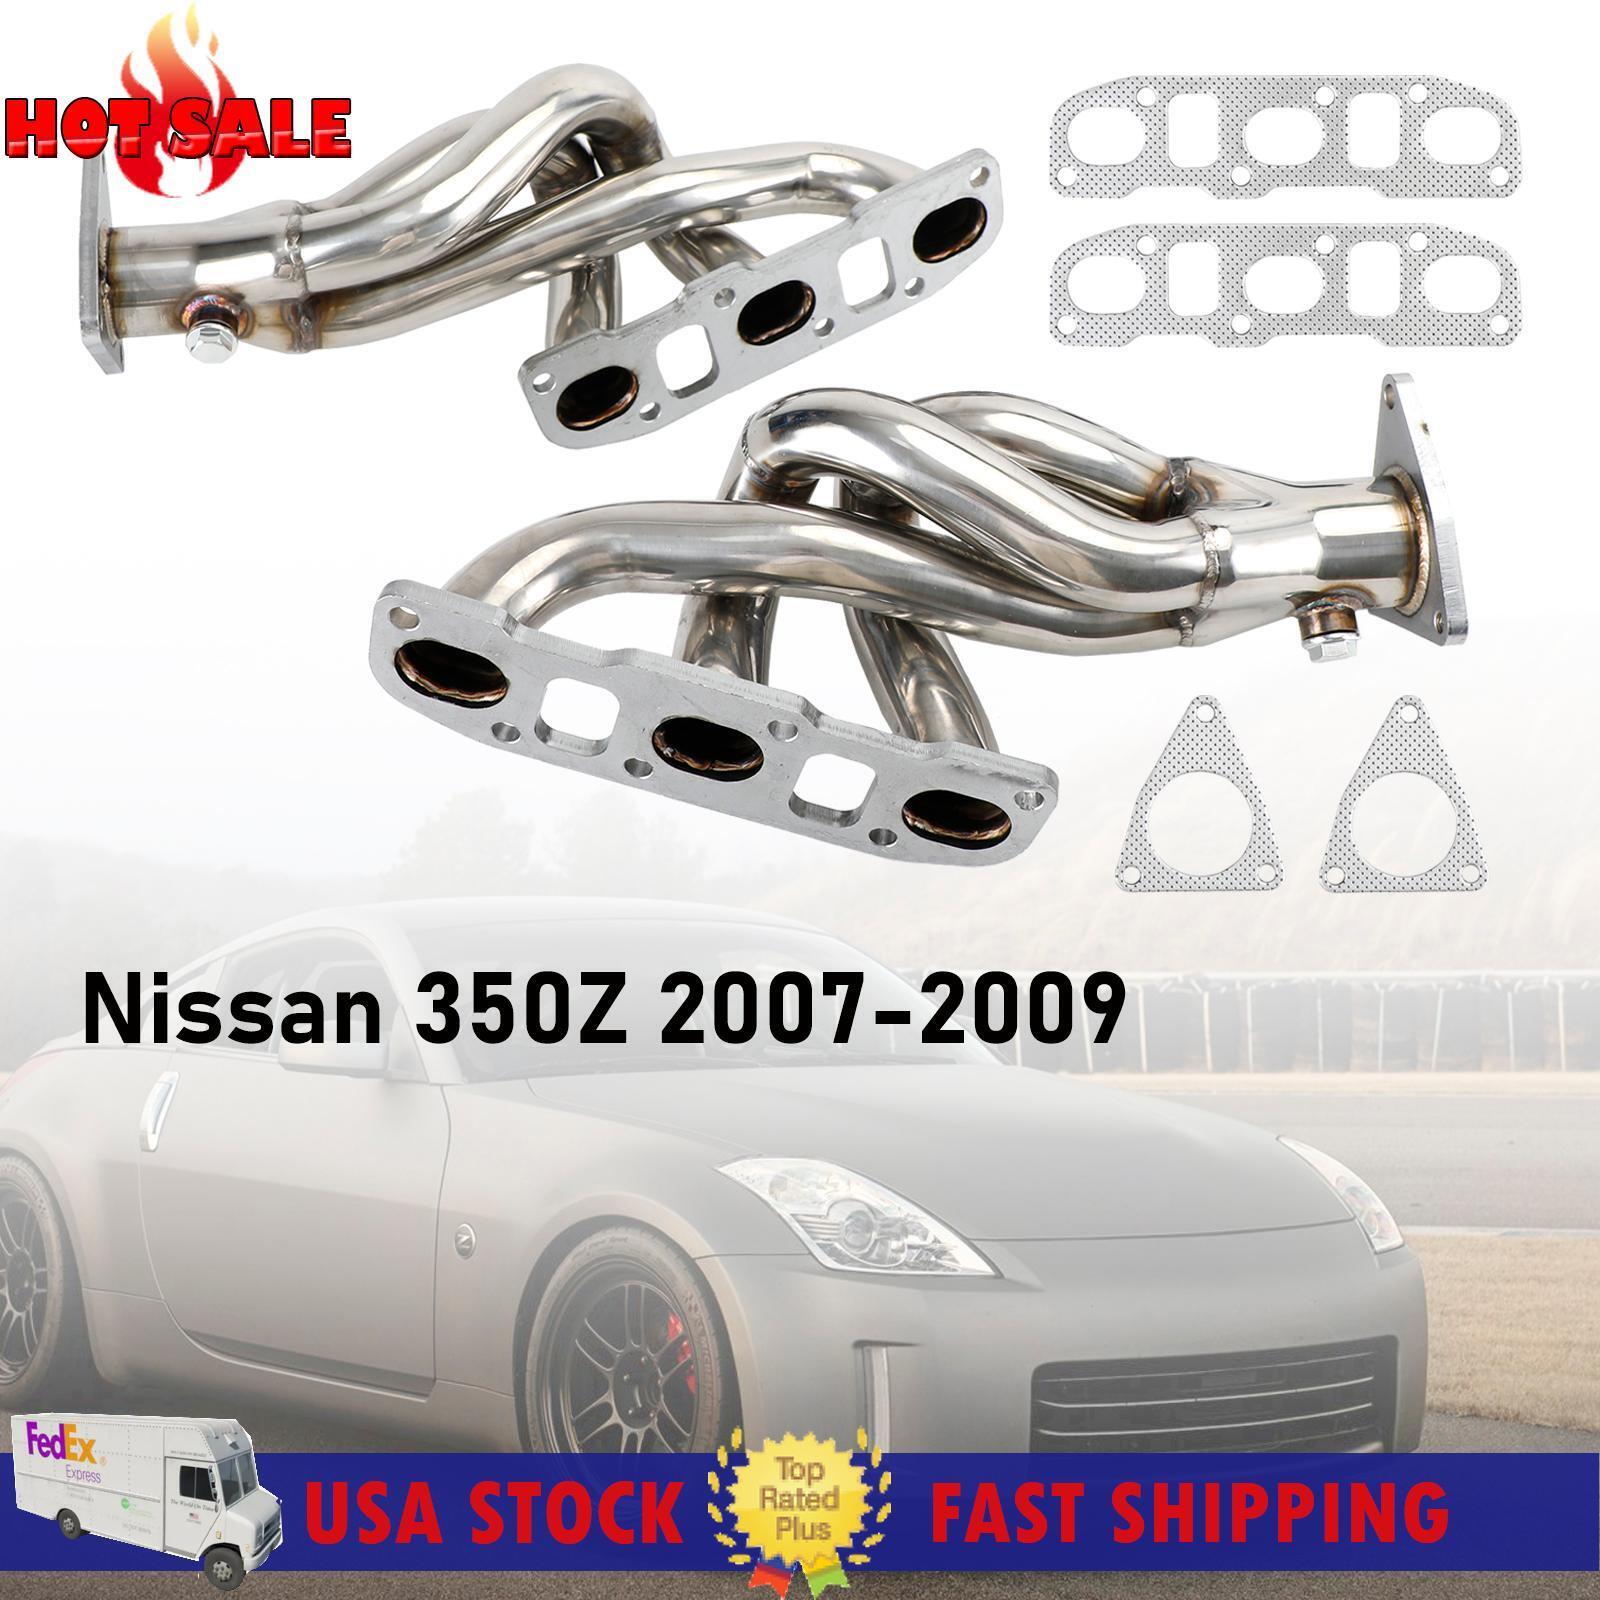 Stainless Steel Exhaust Header Manifold Fit Nissan 350Z 370Z Fit Infiniti G37